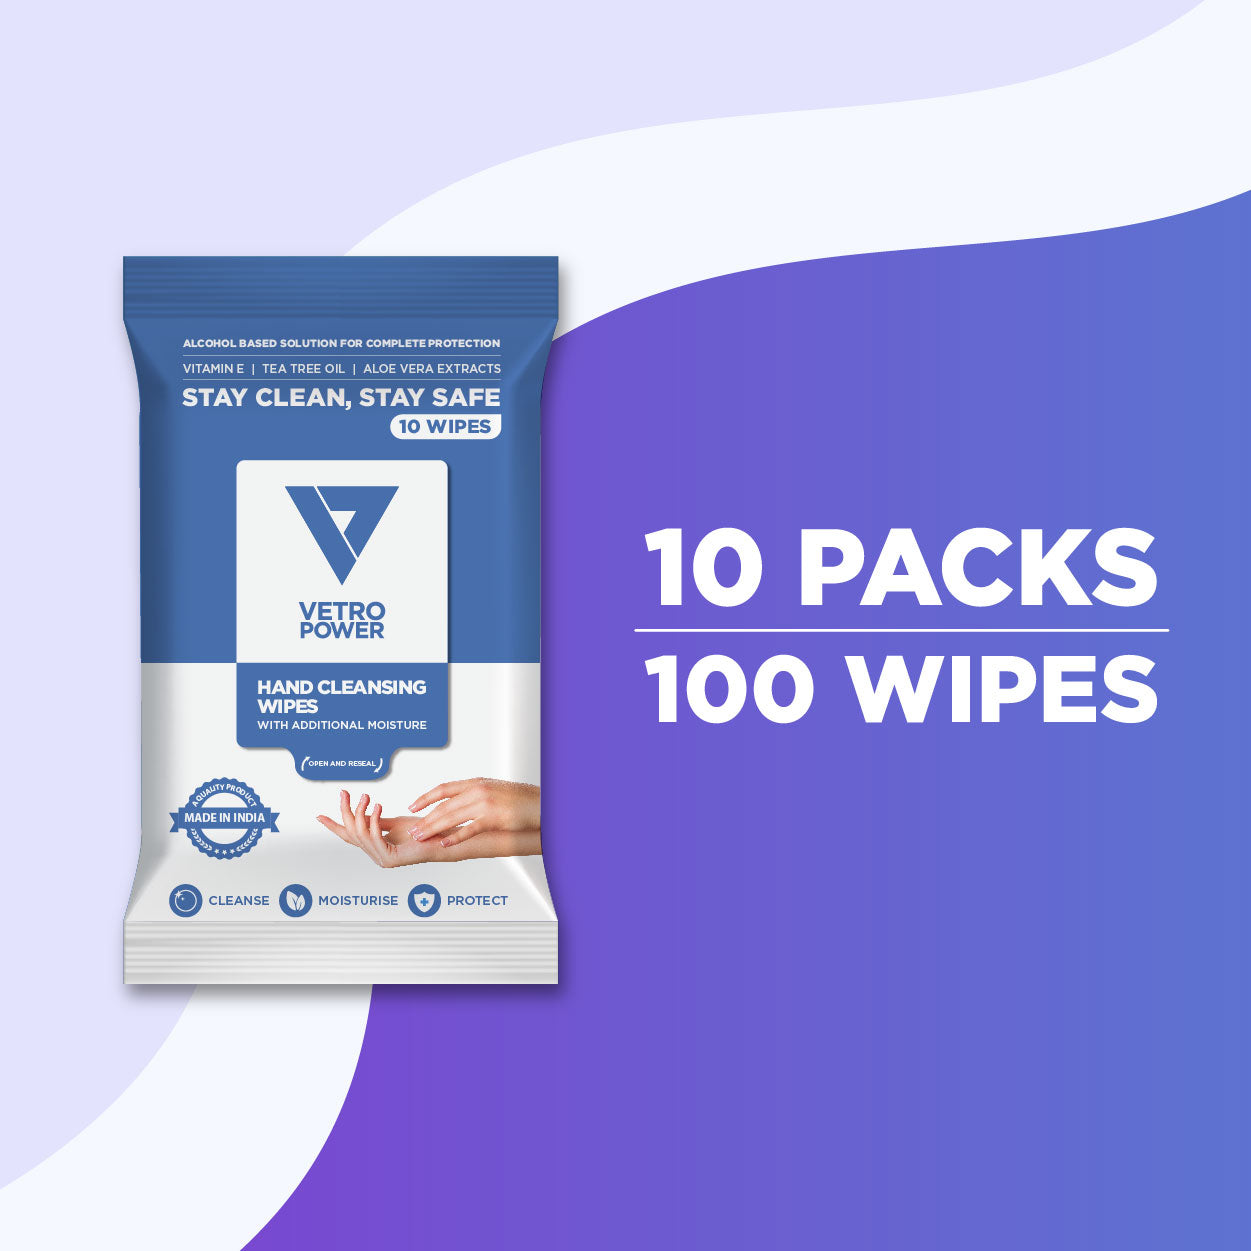 Vetro Power Hand Cleansing Wipes with Aloe Vera, Vitamin E & Tea Tree Oil - 100 Wipes (Pack of 10, 10 each)